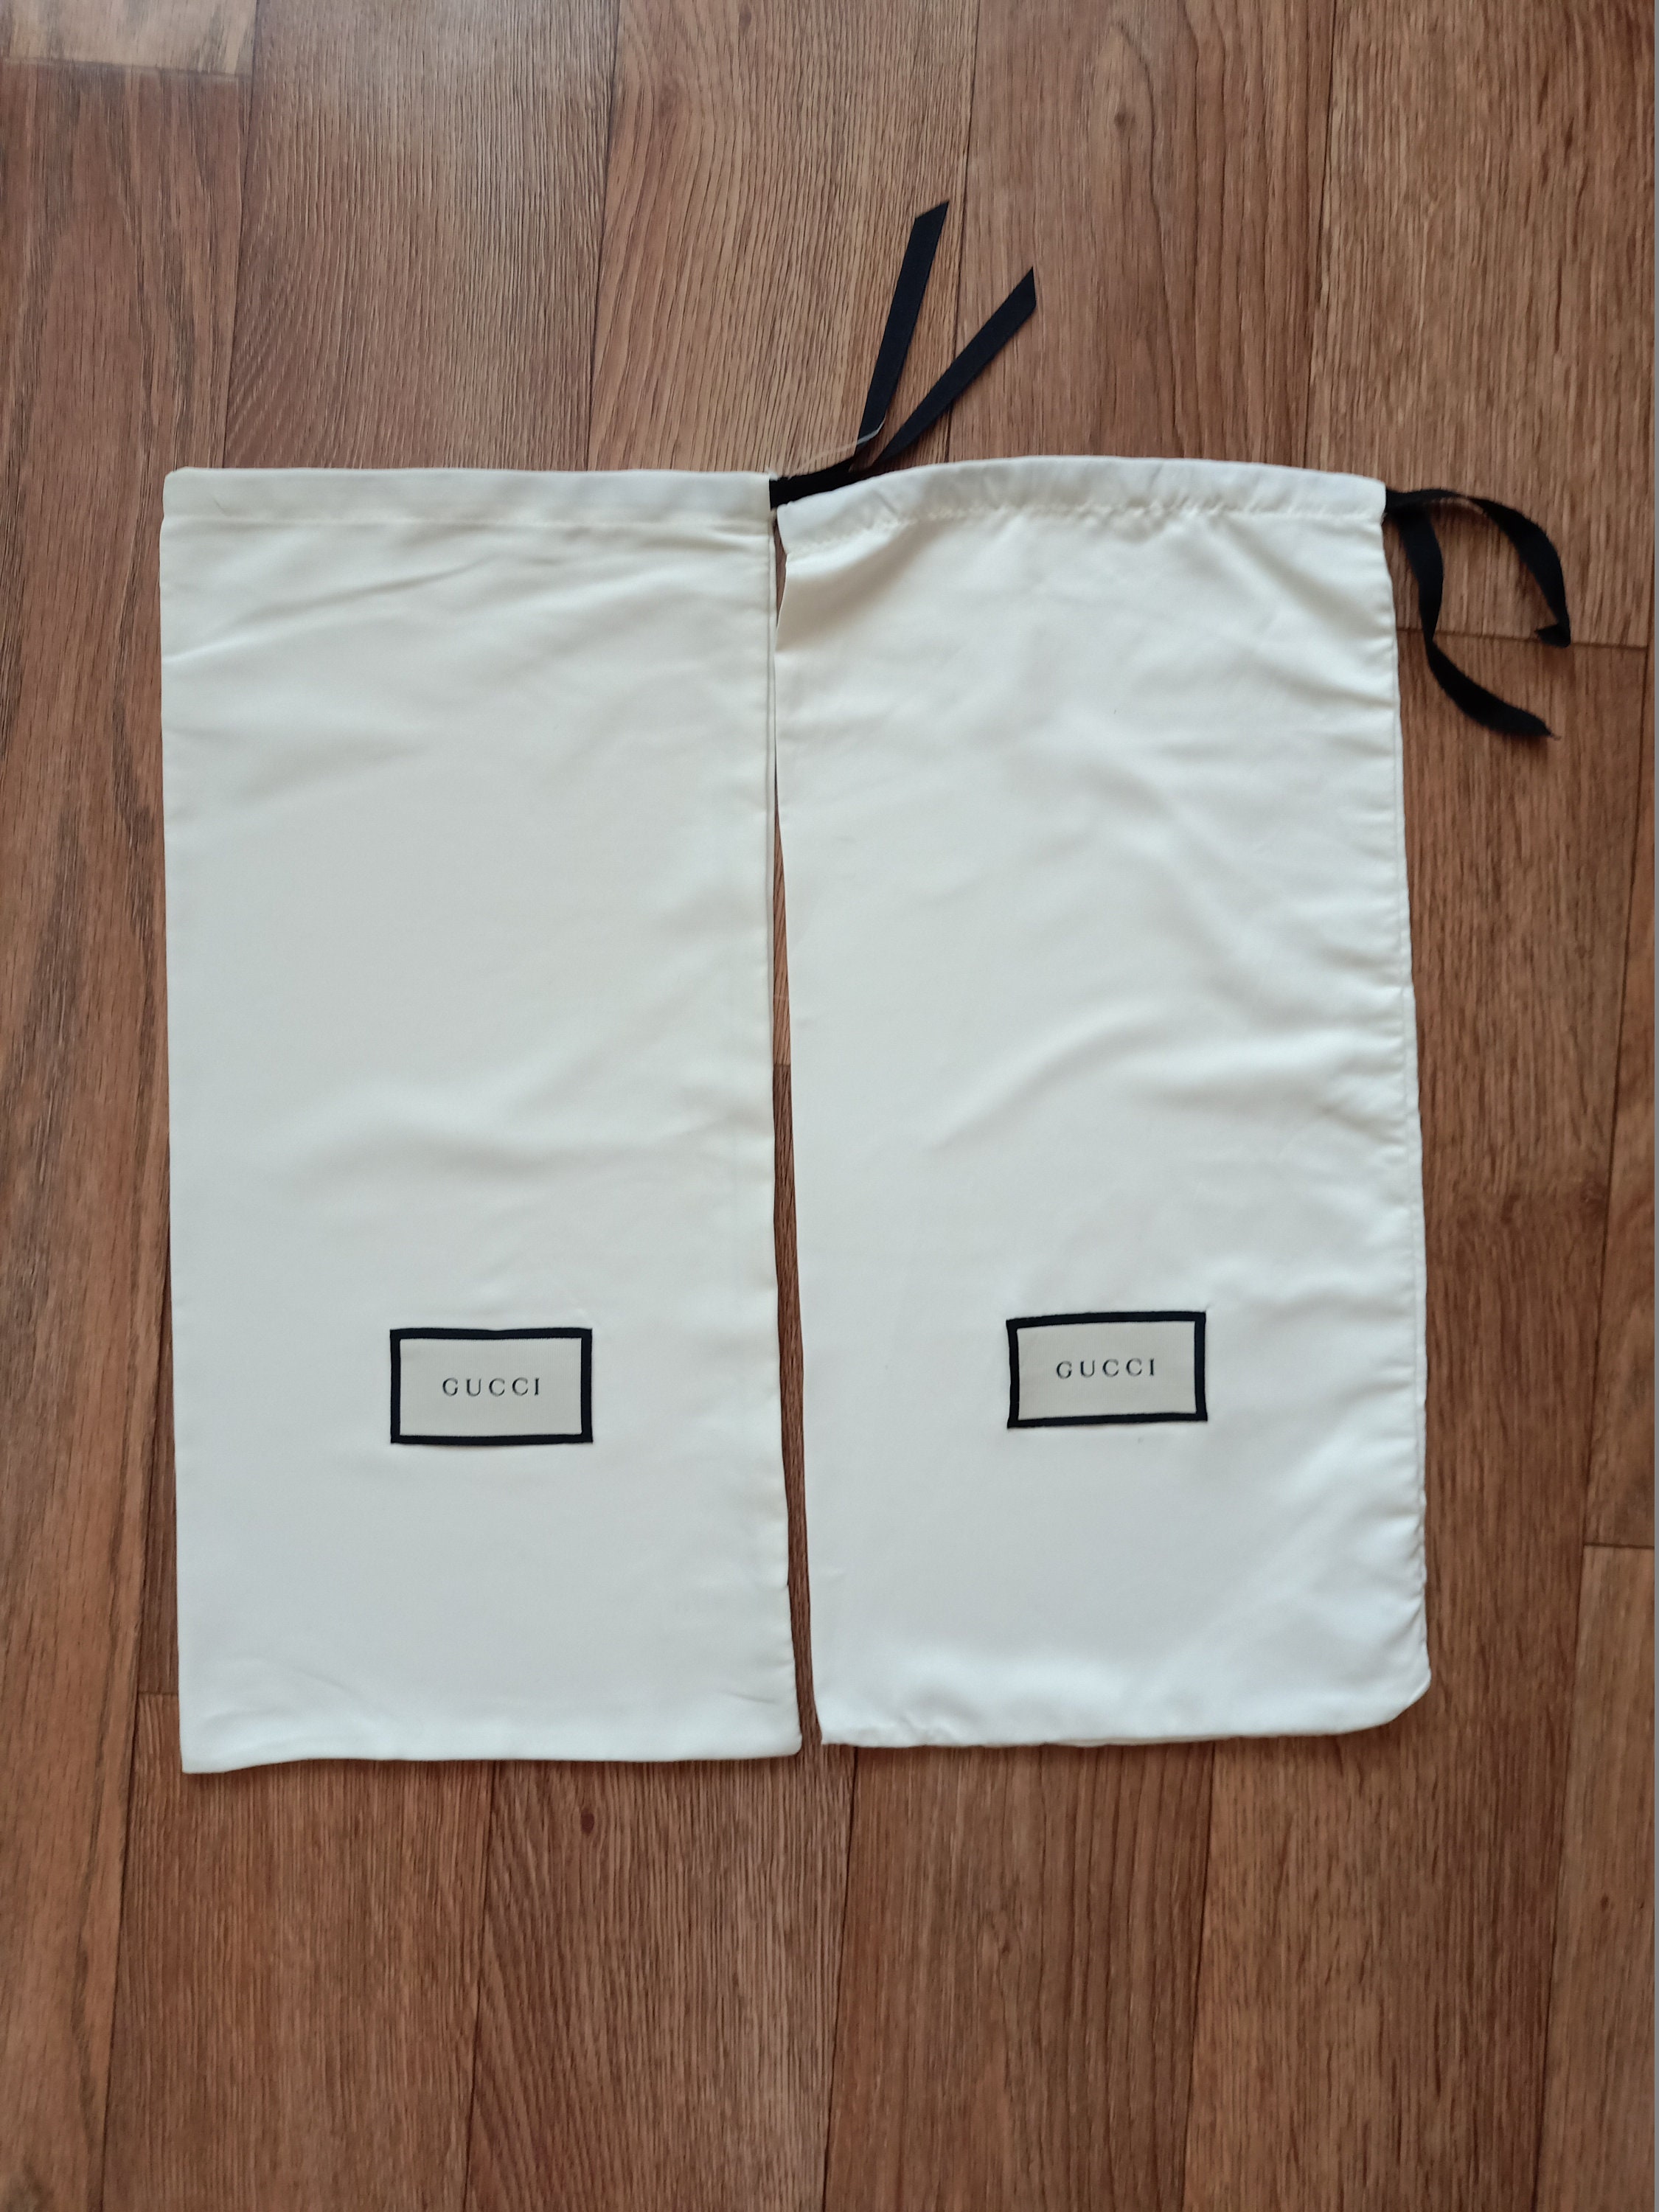 GUCCI LOT 2 White Polyester Dust Bag for Shoes 2042 Cm 